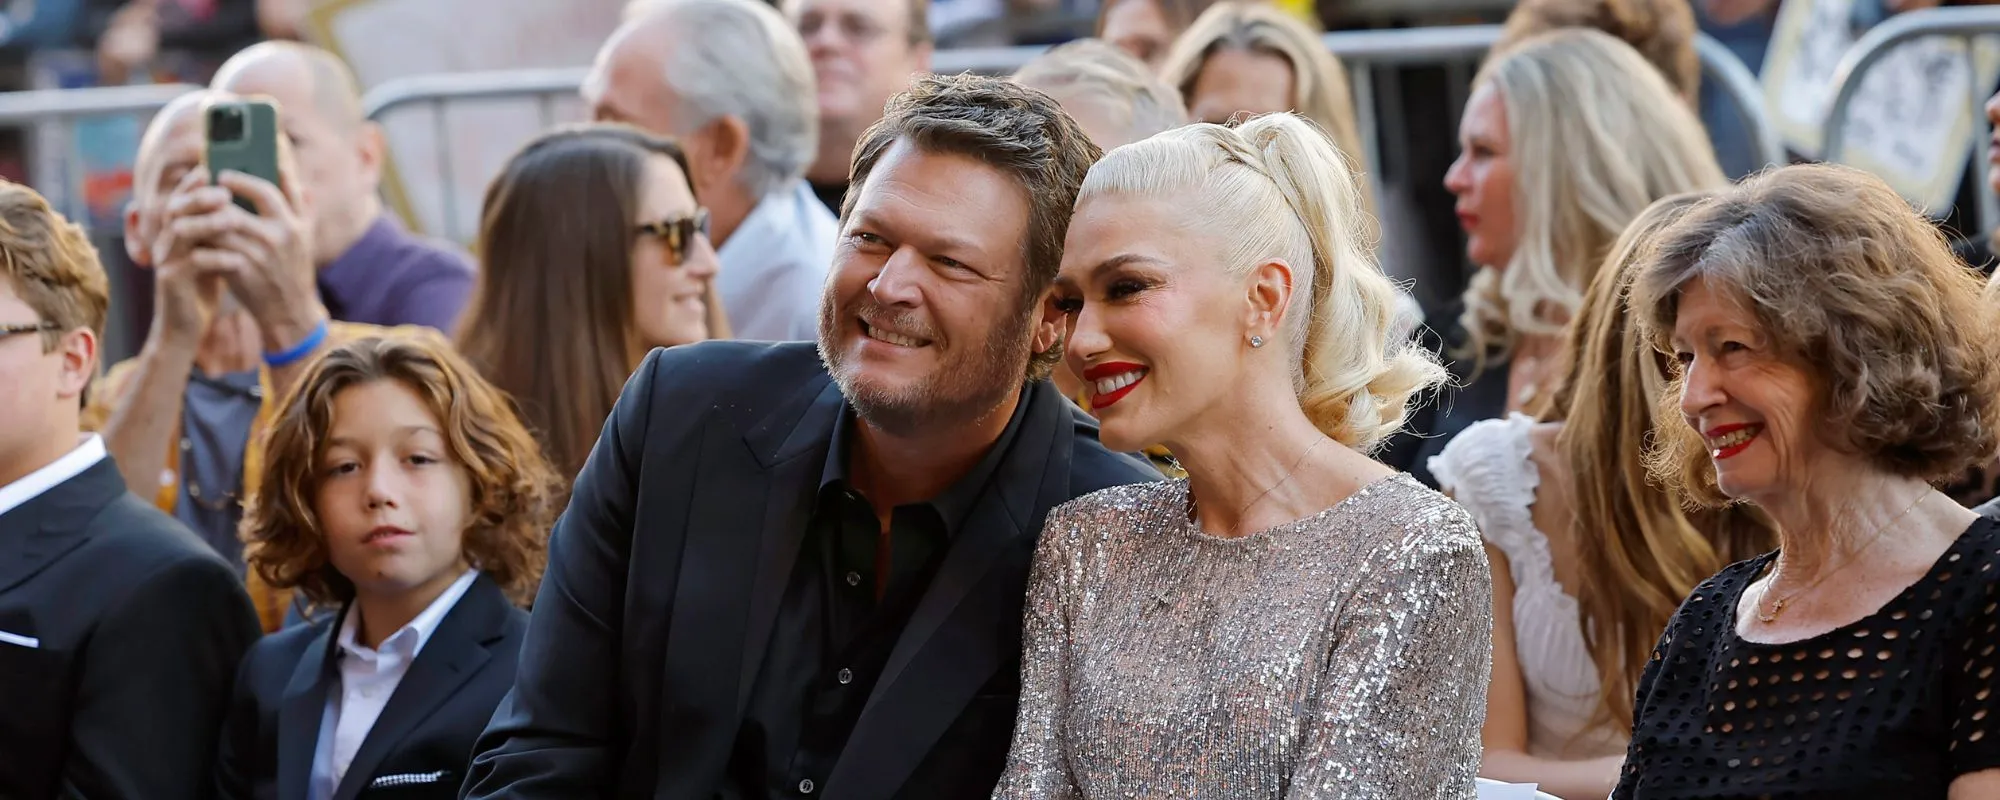 Blake Shelton Makes History With a Little Help From Wife Gwen Stefani